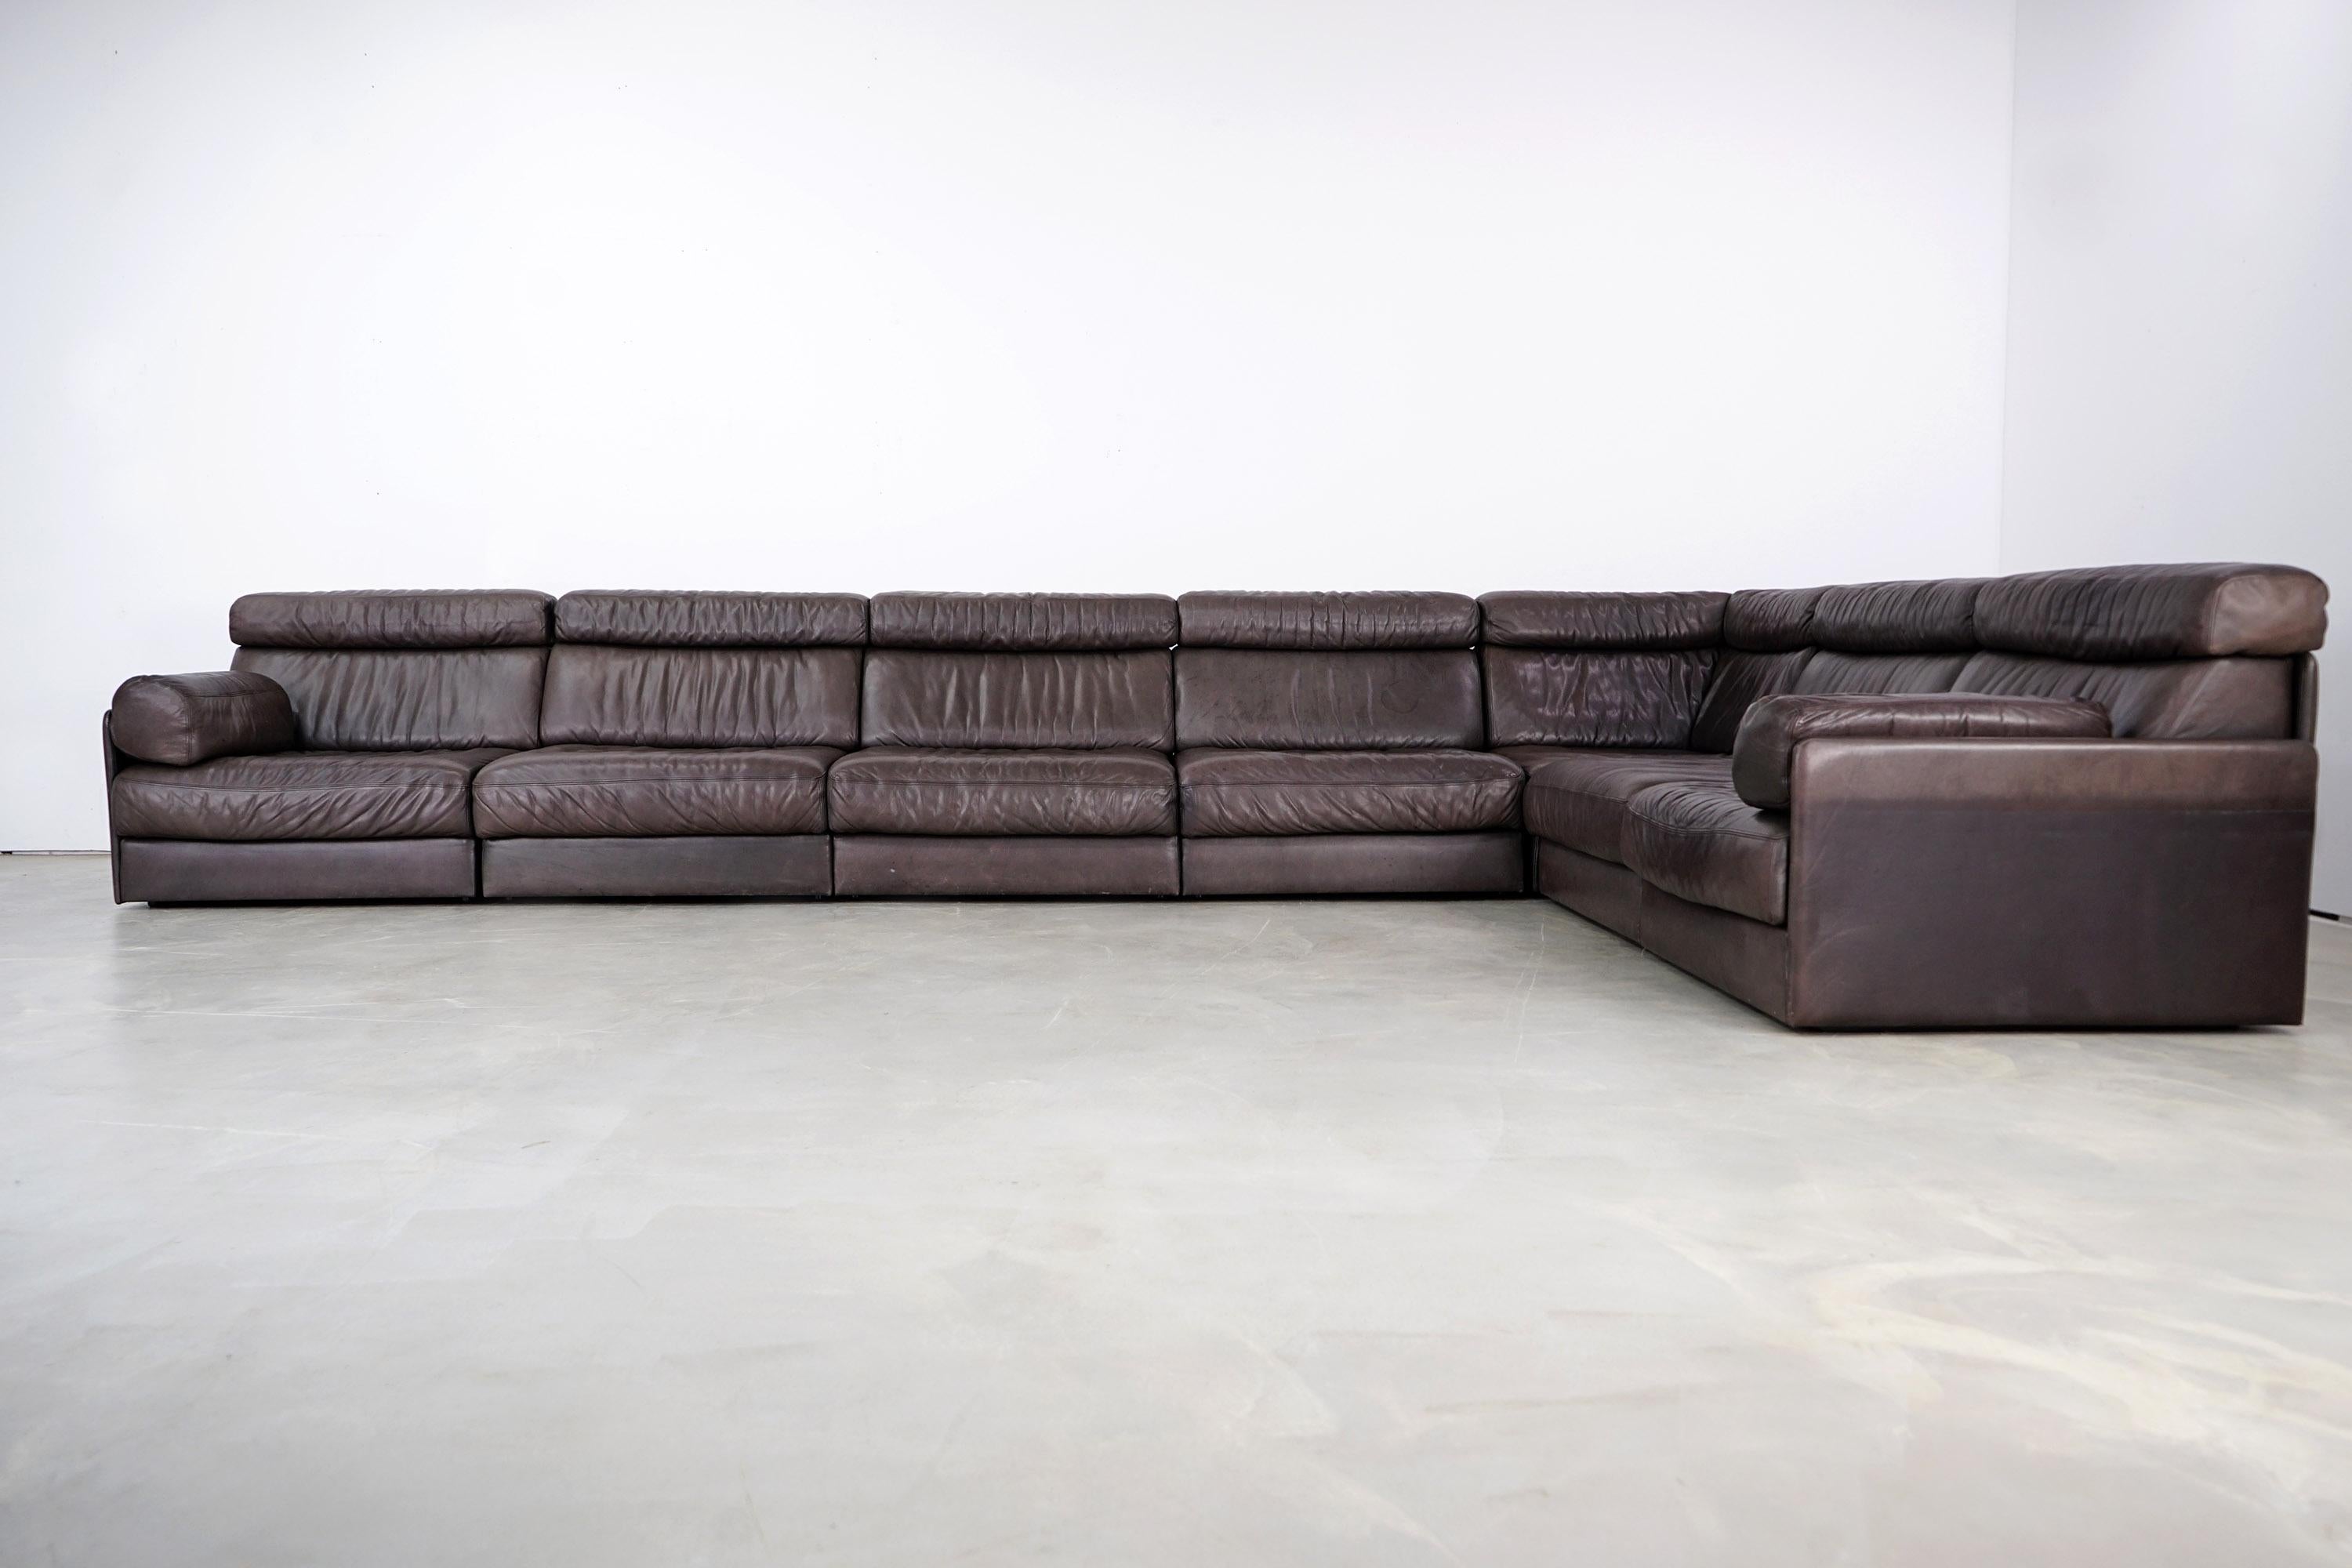 High-quality sofa from Swiss quality manufacturer DeSede. This corner sofa consists of seven seating elements, each of which can be folded out into a sleeping unit. The thick, soft leather is in very good condition with no cracks or holes and shows